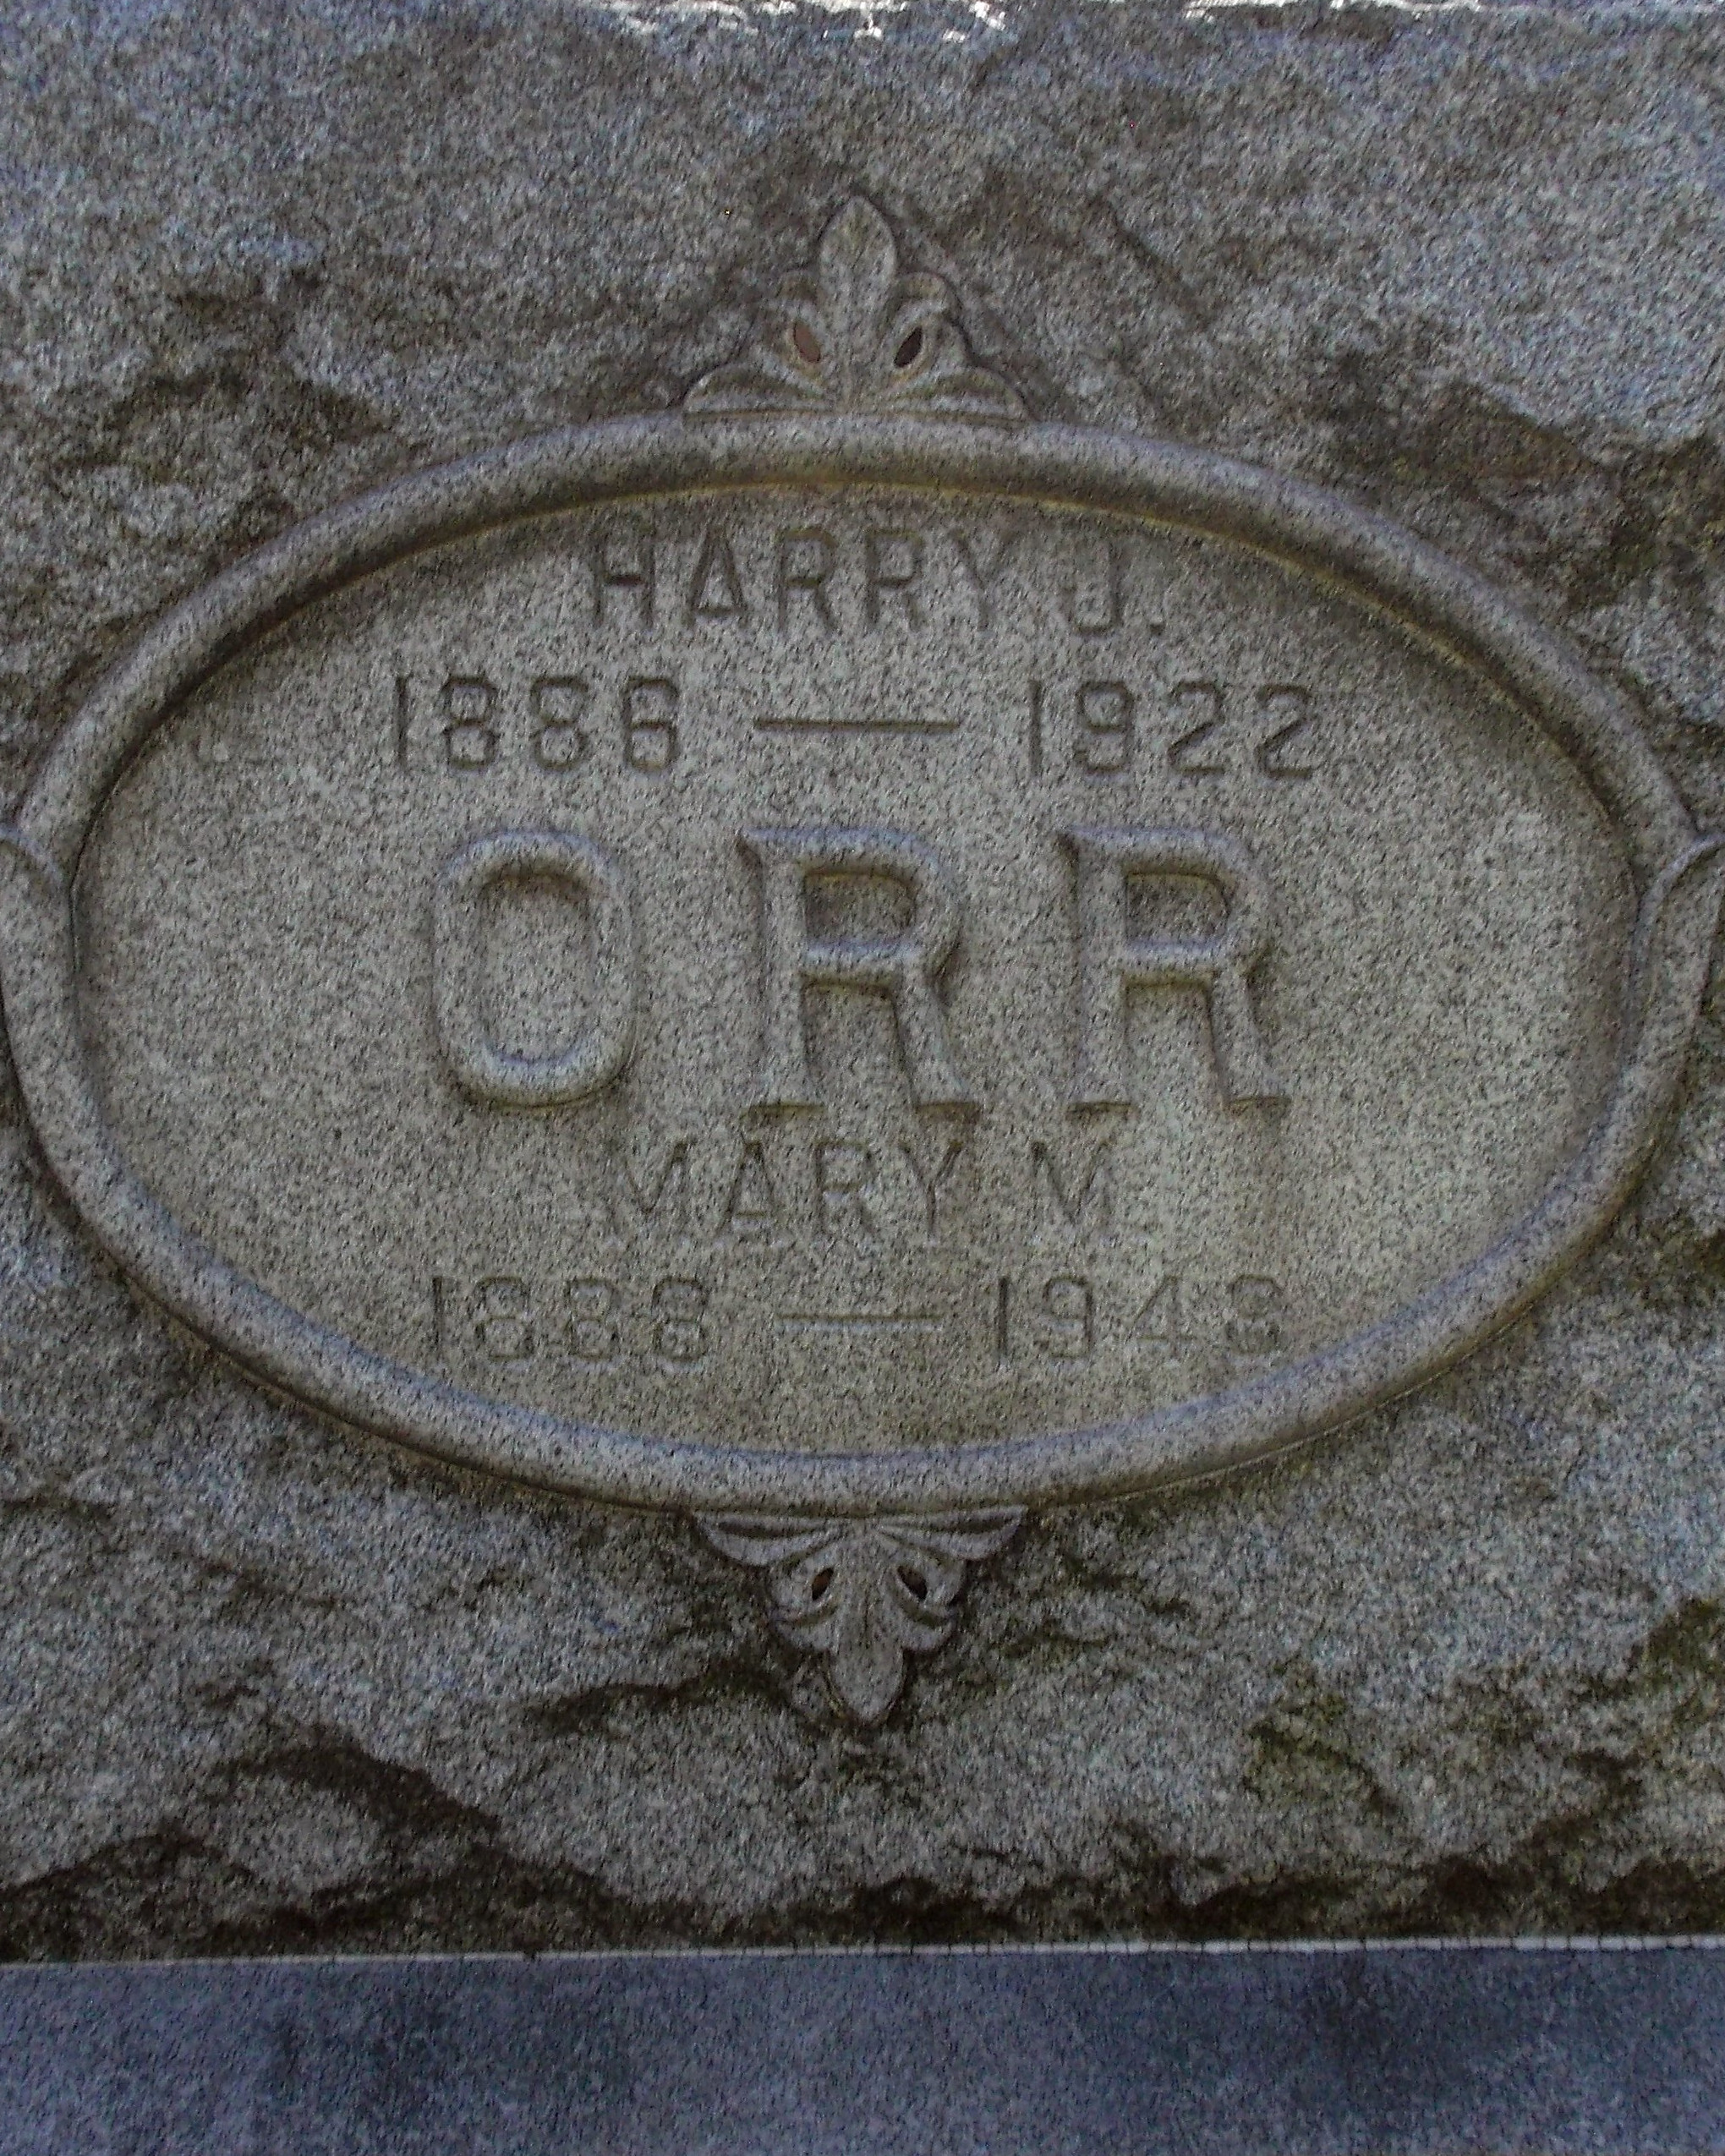 Police Officer Harry J. Orr | Rahway Police Department, New Jersey